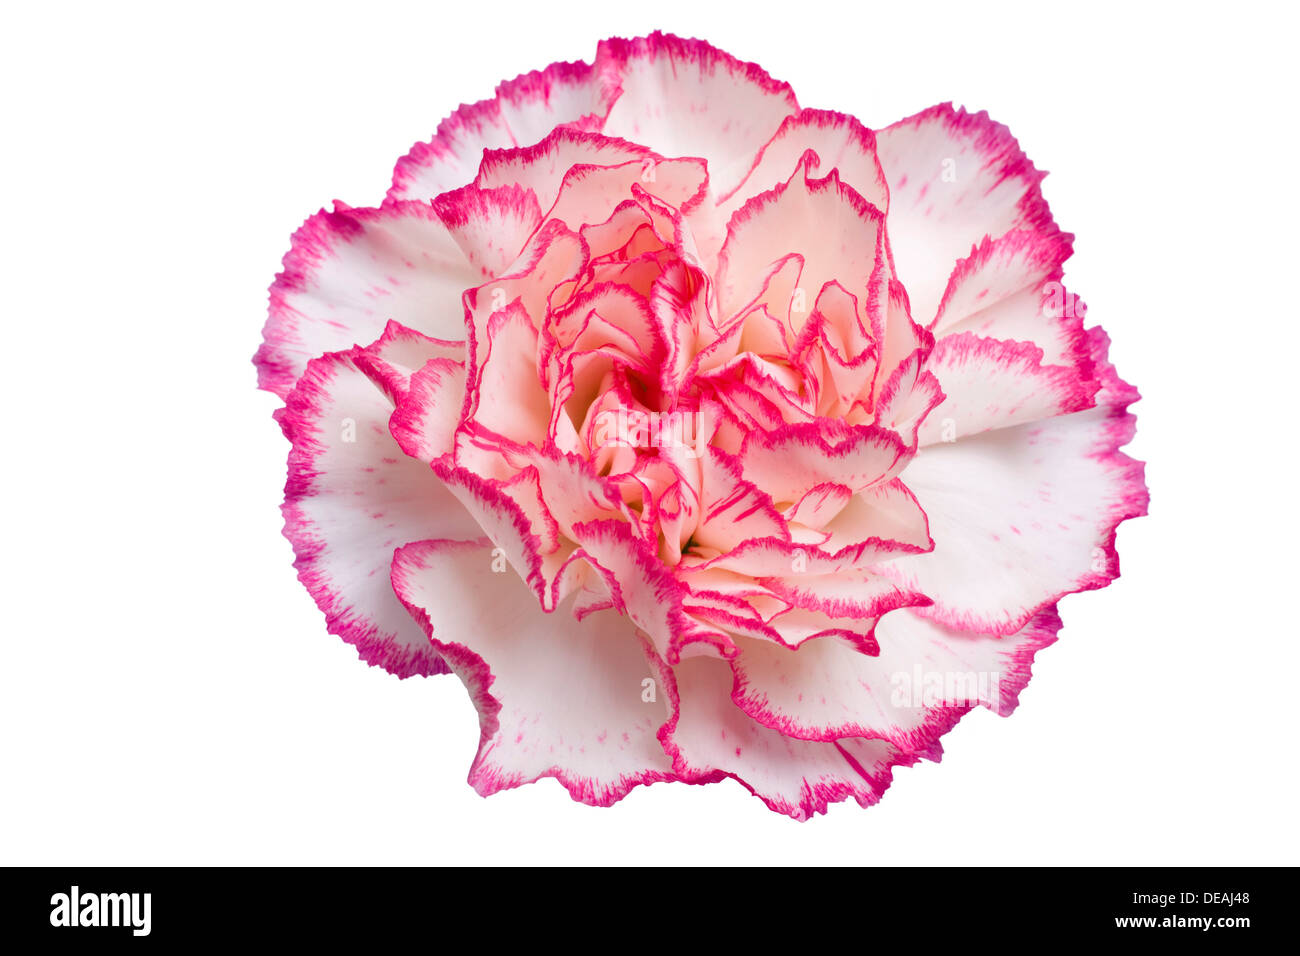 Carnation (Dianthus caryophyllus), white and pink Stock Photo